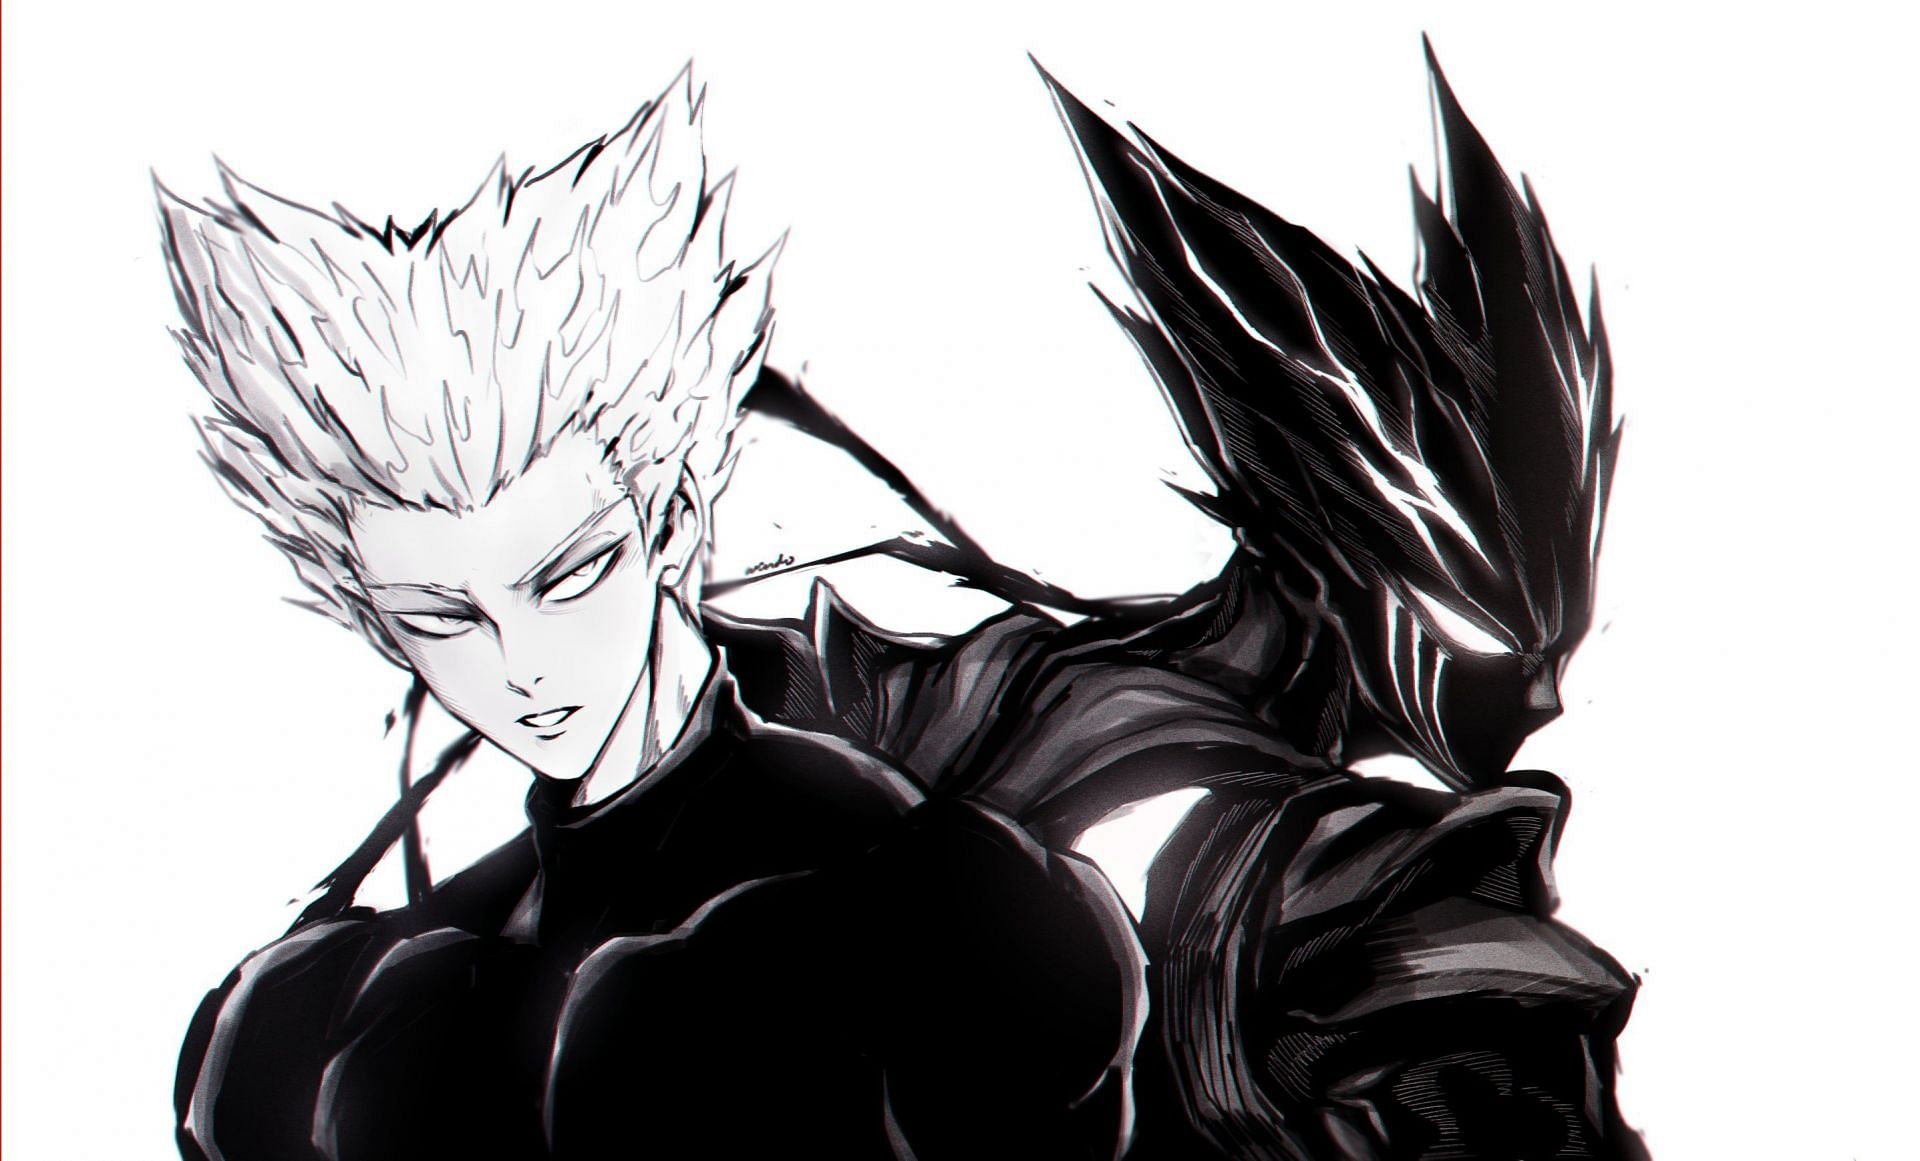 Comparing Garou to some of the characters in One Punch Man (Image via Twitter/@Windiwindo)